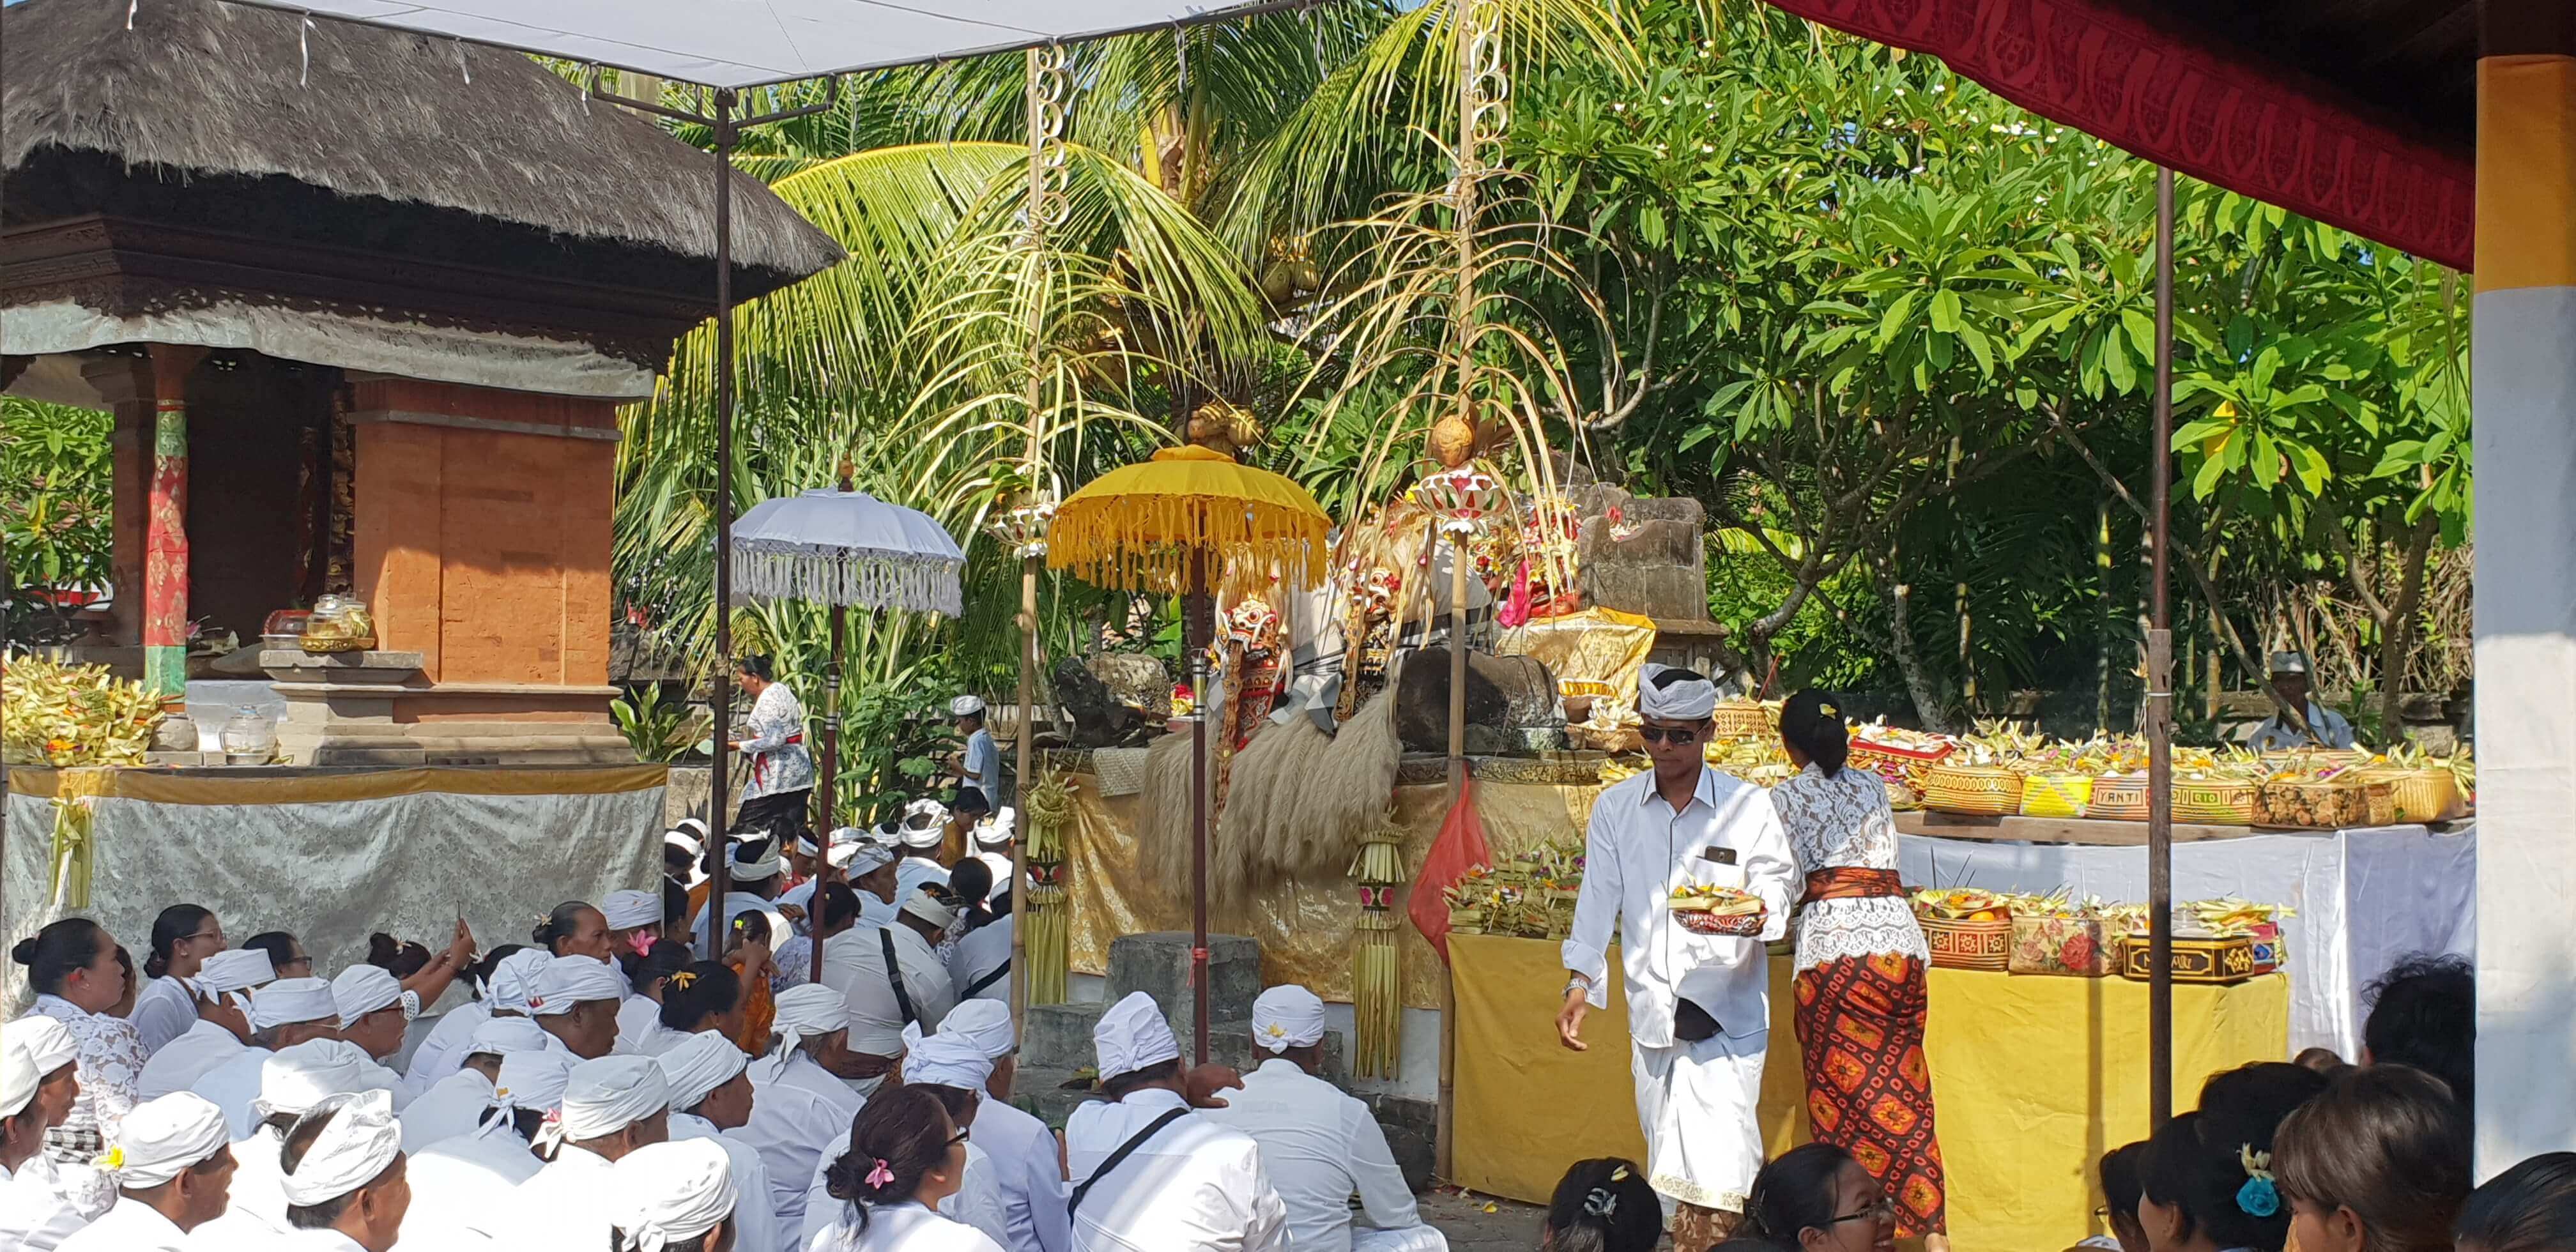 You begin your 10 day Bali trip by visiting the Pura Blanjong which is one of the must visit places in Sanur